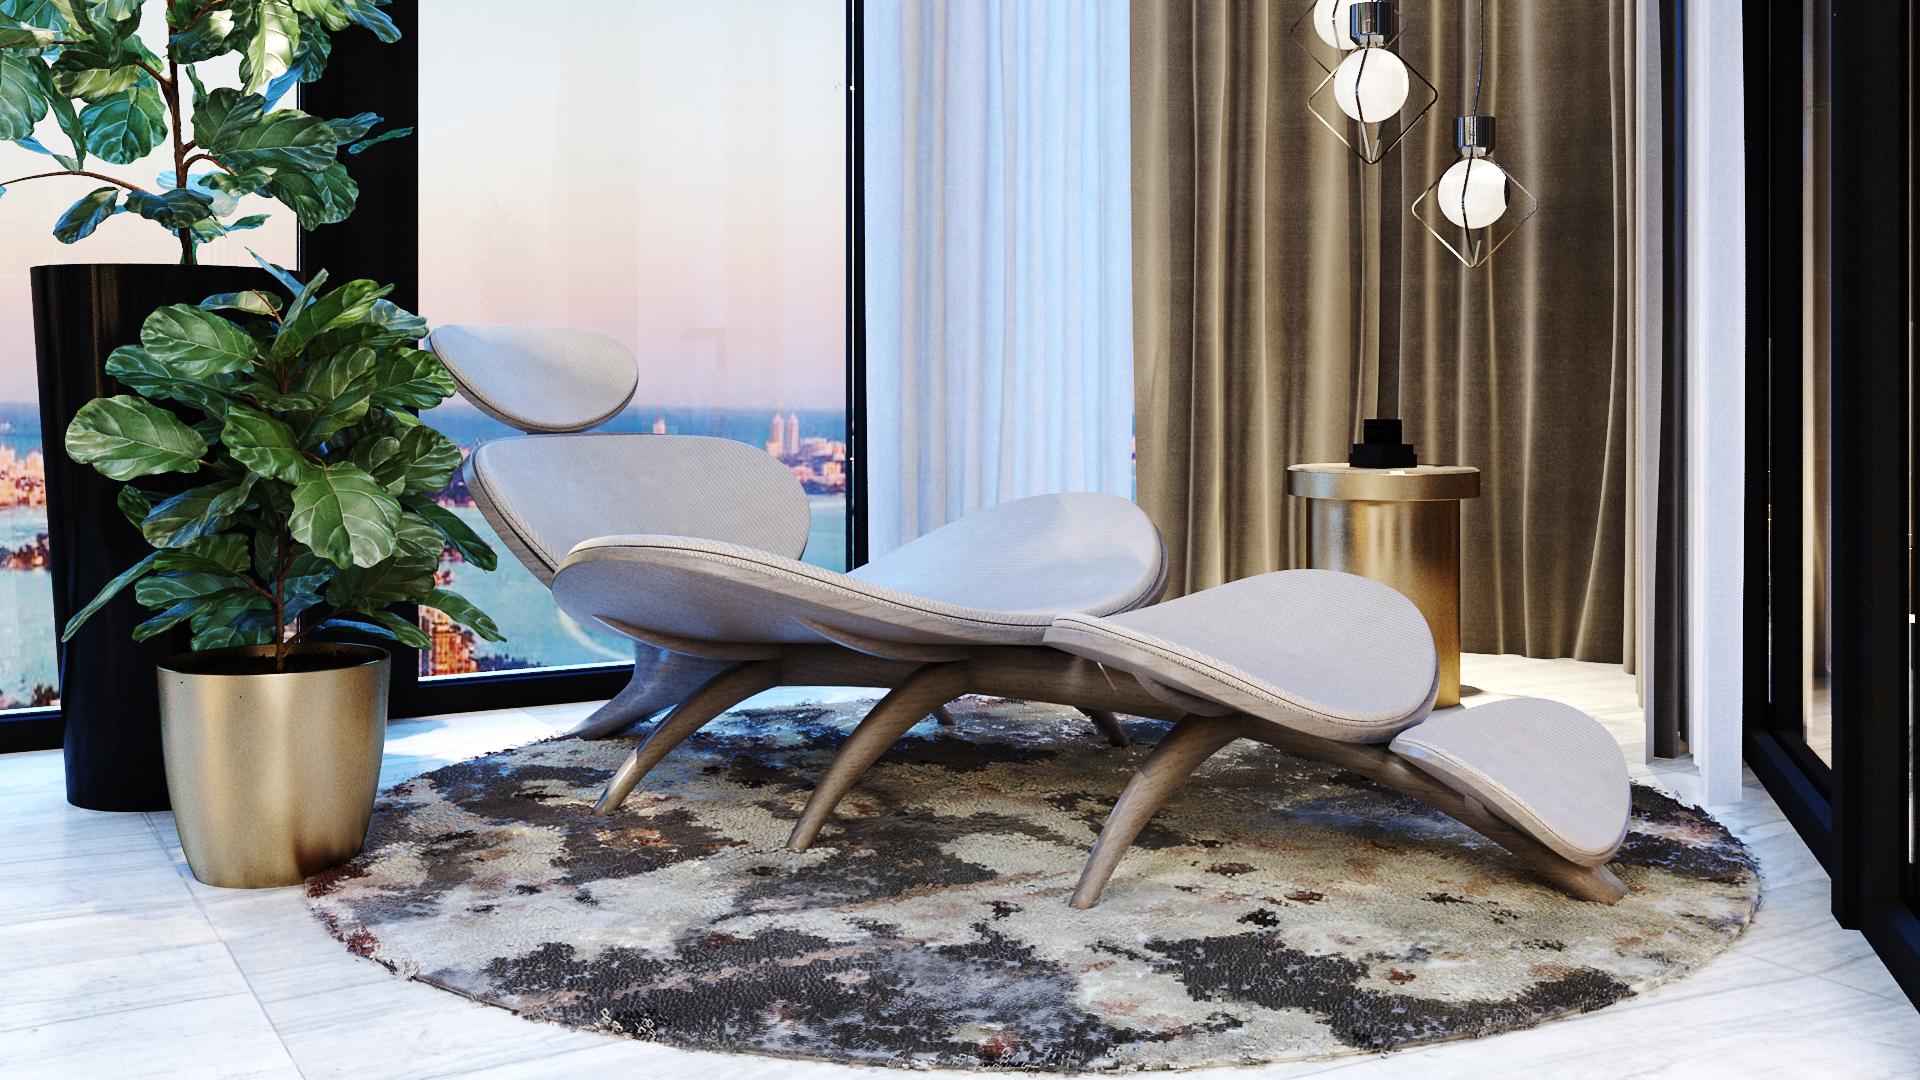 Italian Dragonfly Inspired Lounge Chair Upholstered in Leather, True White For Sale